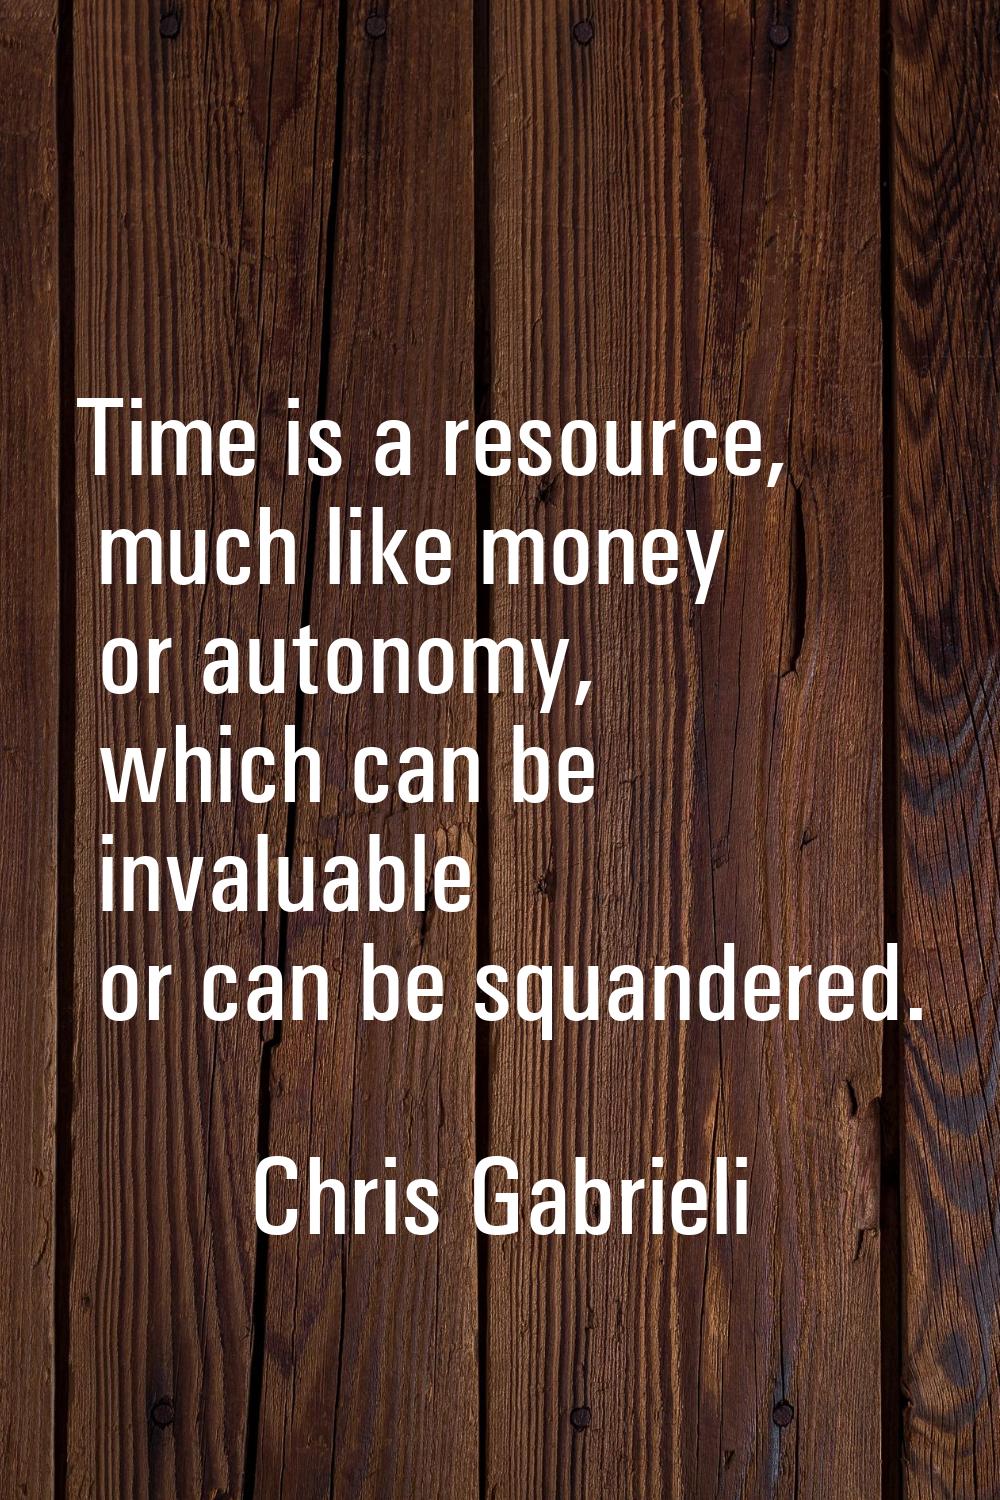 Time is a resource, much like money or autonomy, which can be invaluable or can be squandered.